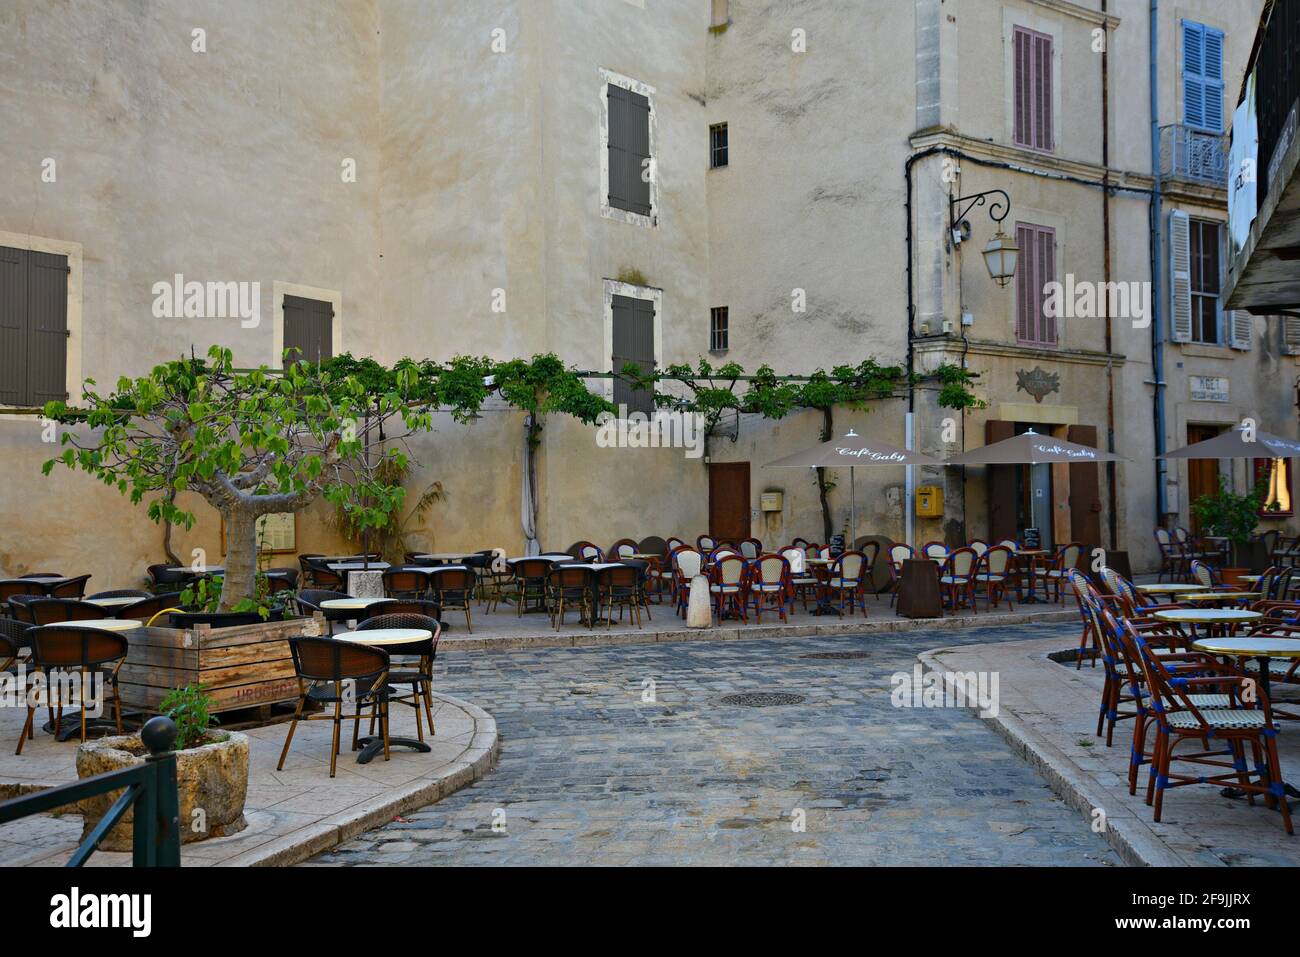 Typical Provençal style houses and local cafes on the main square of the picturesque village of Lourmarin in Vaucluse, Provence France. Stock Photo